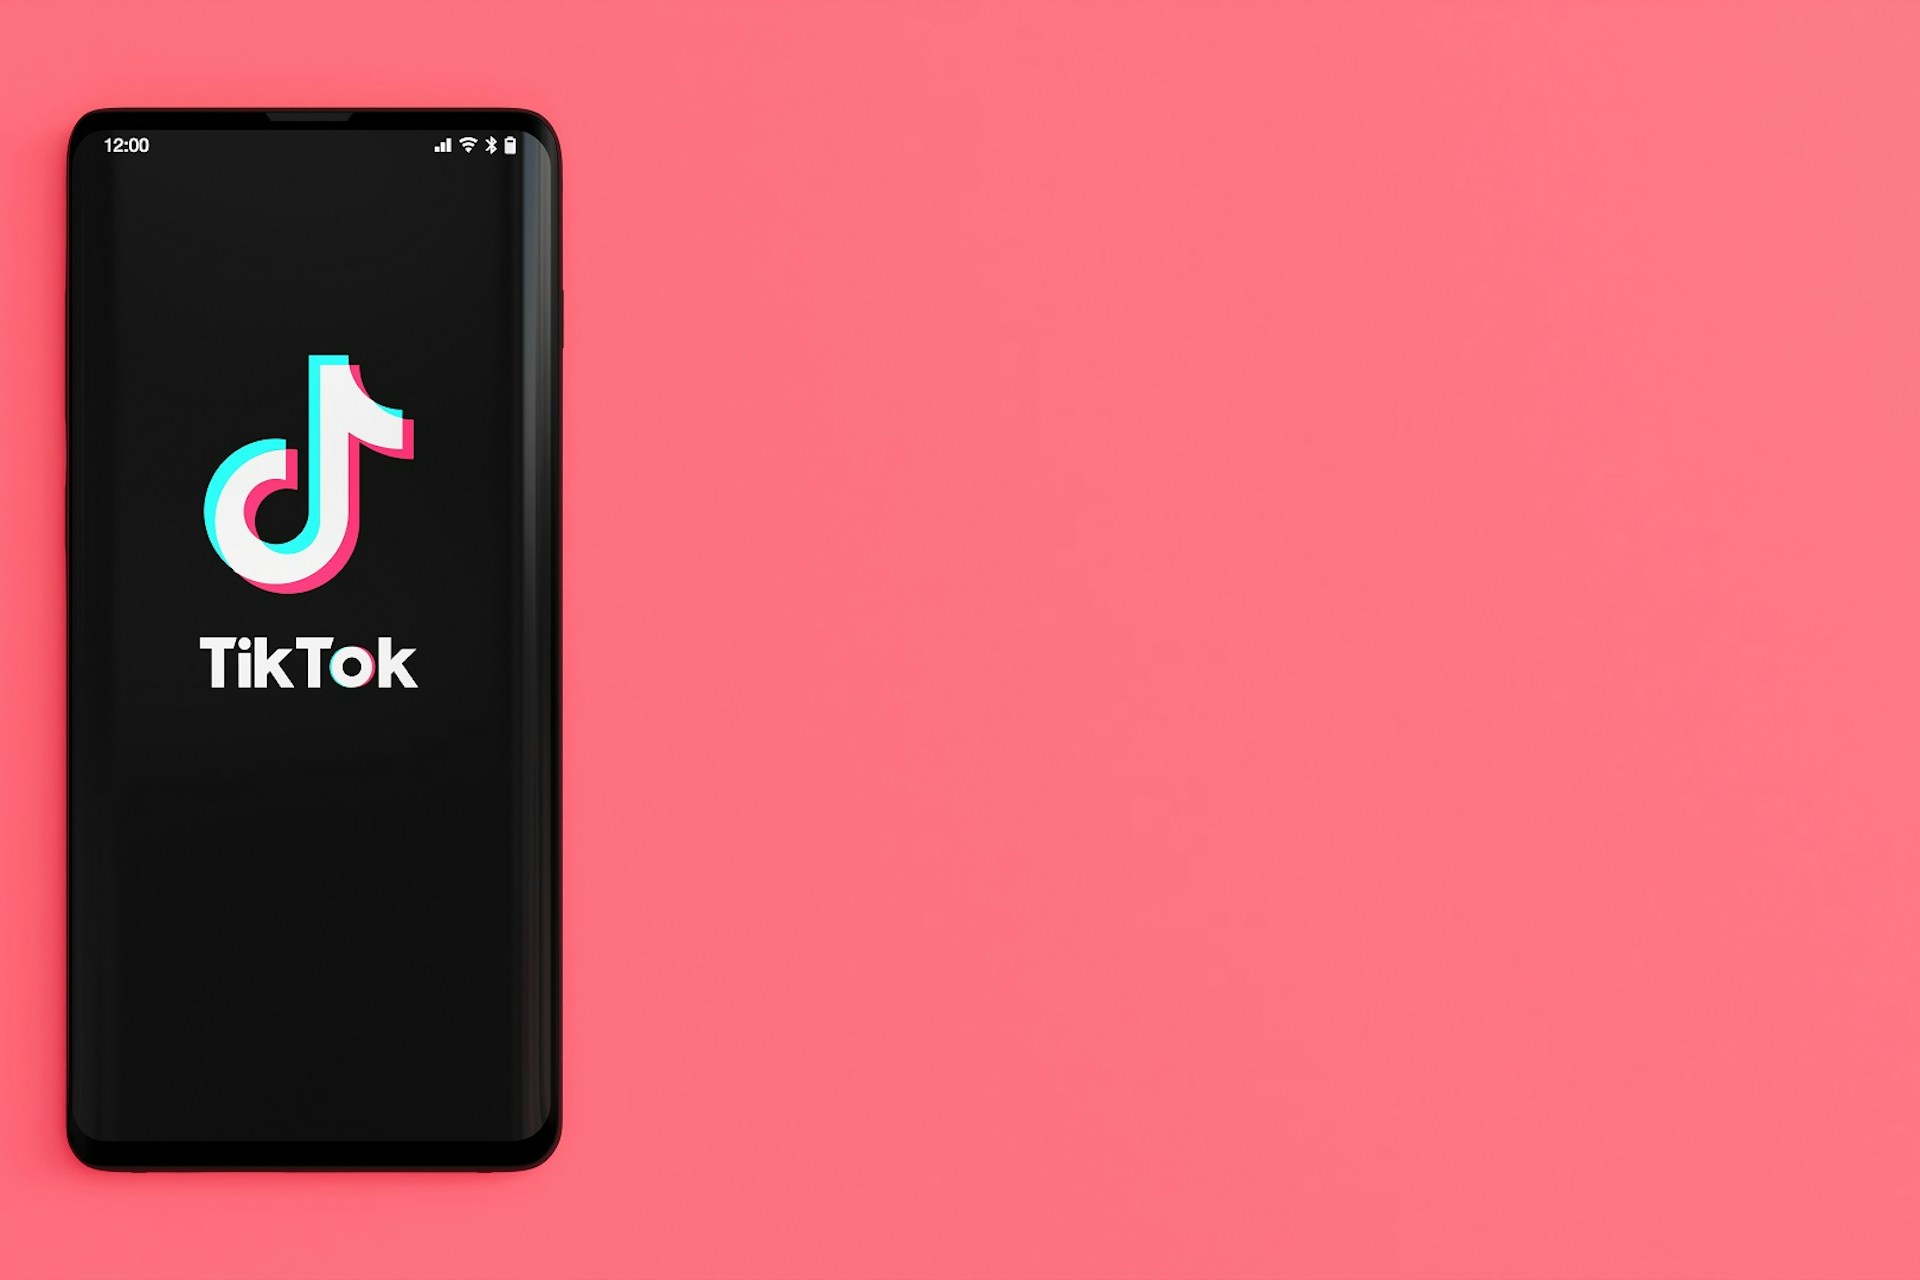 TikTok logo in phone with pink background